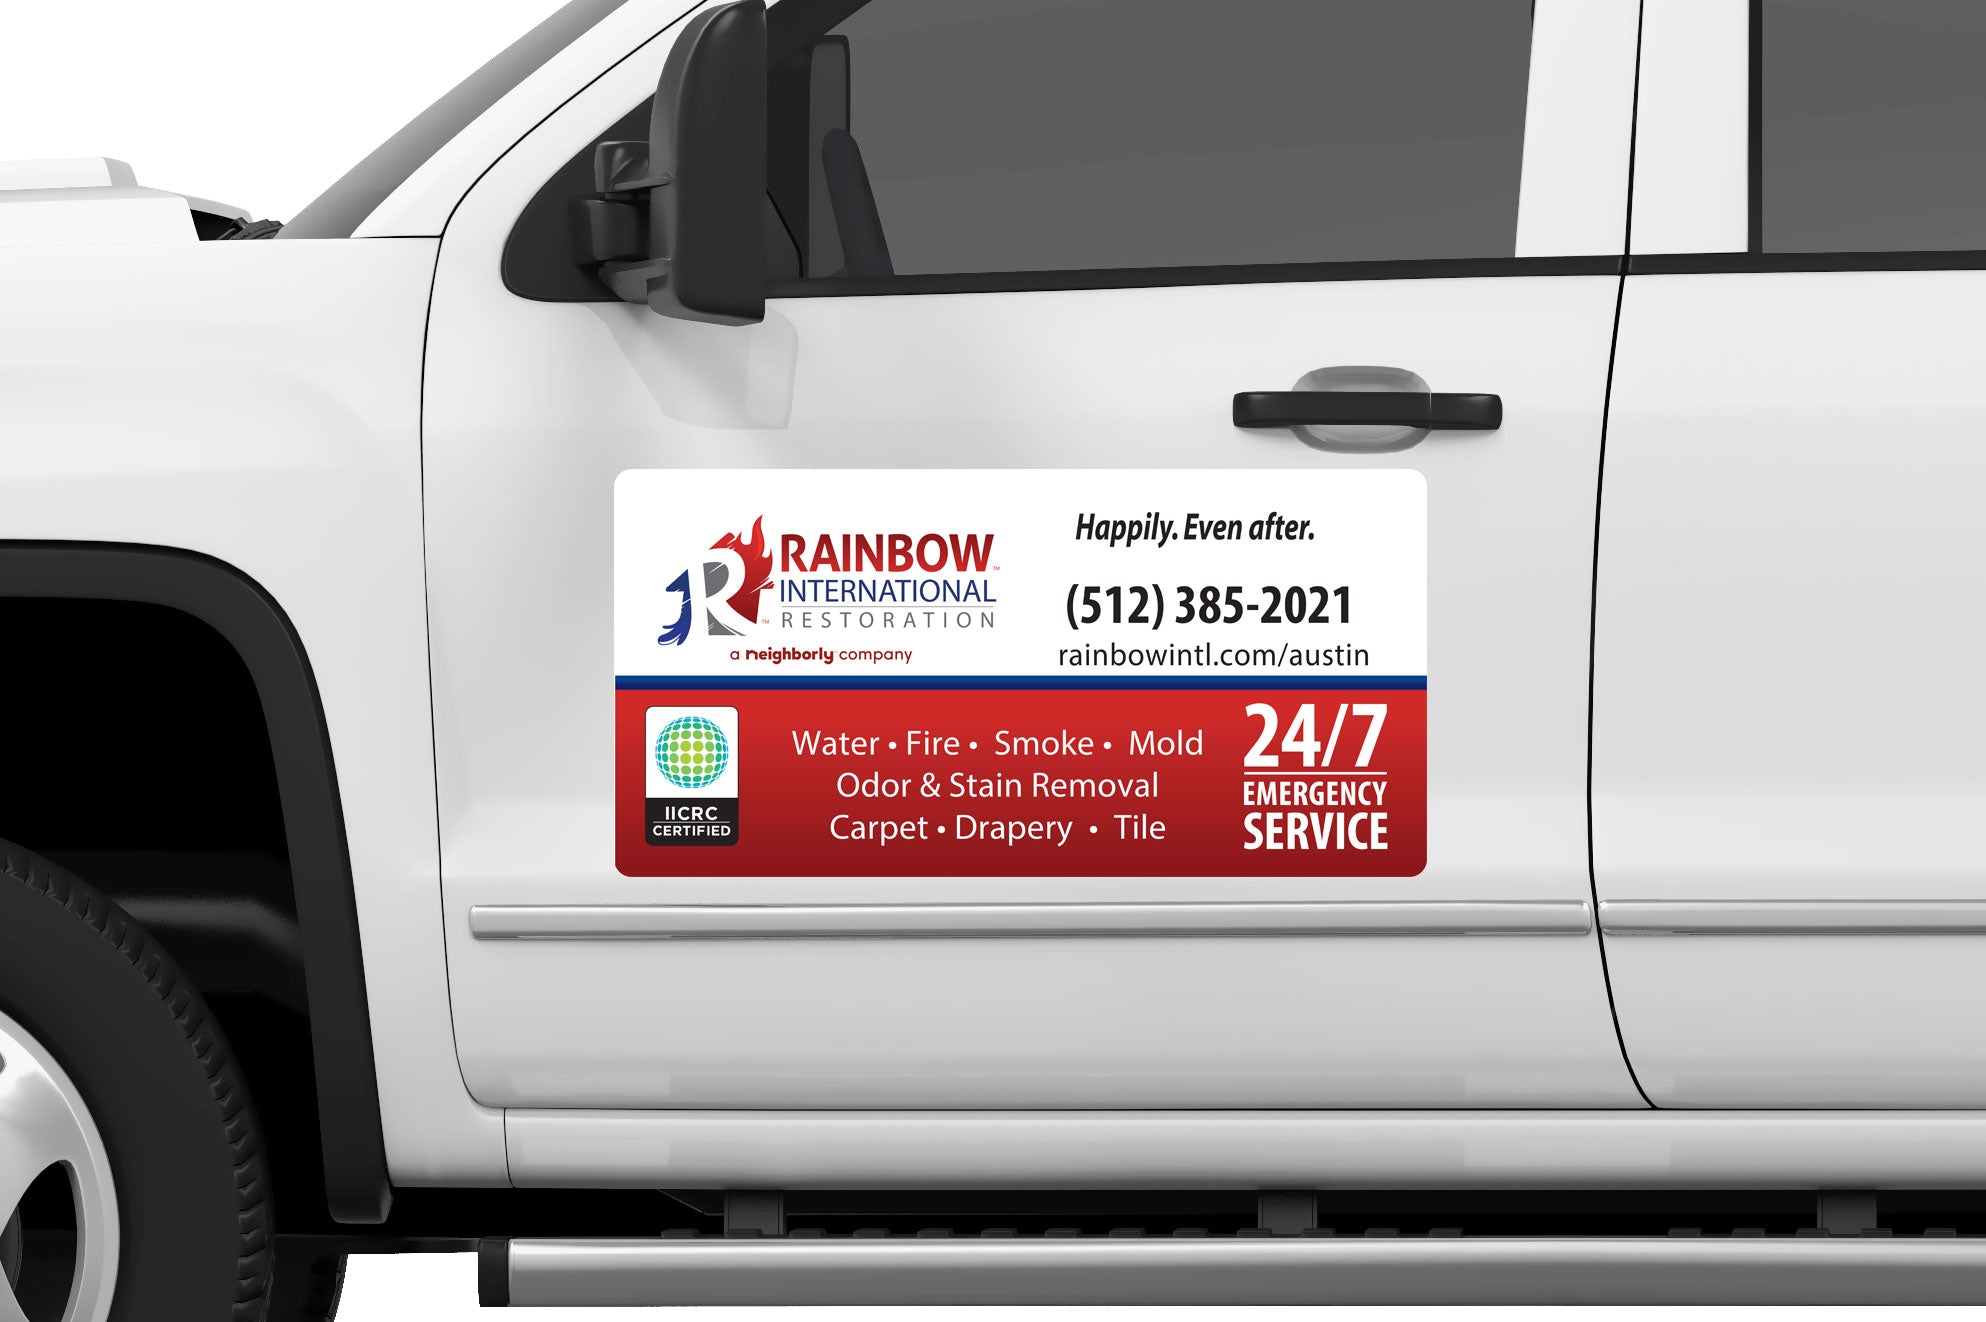 Eye-catching custom van magnets promoting a local bakery, displayed on side panels for maximum roadside visibility.